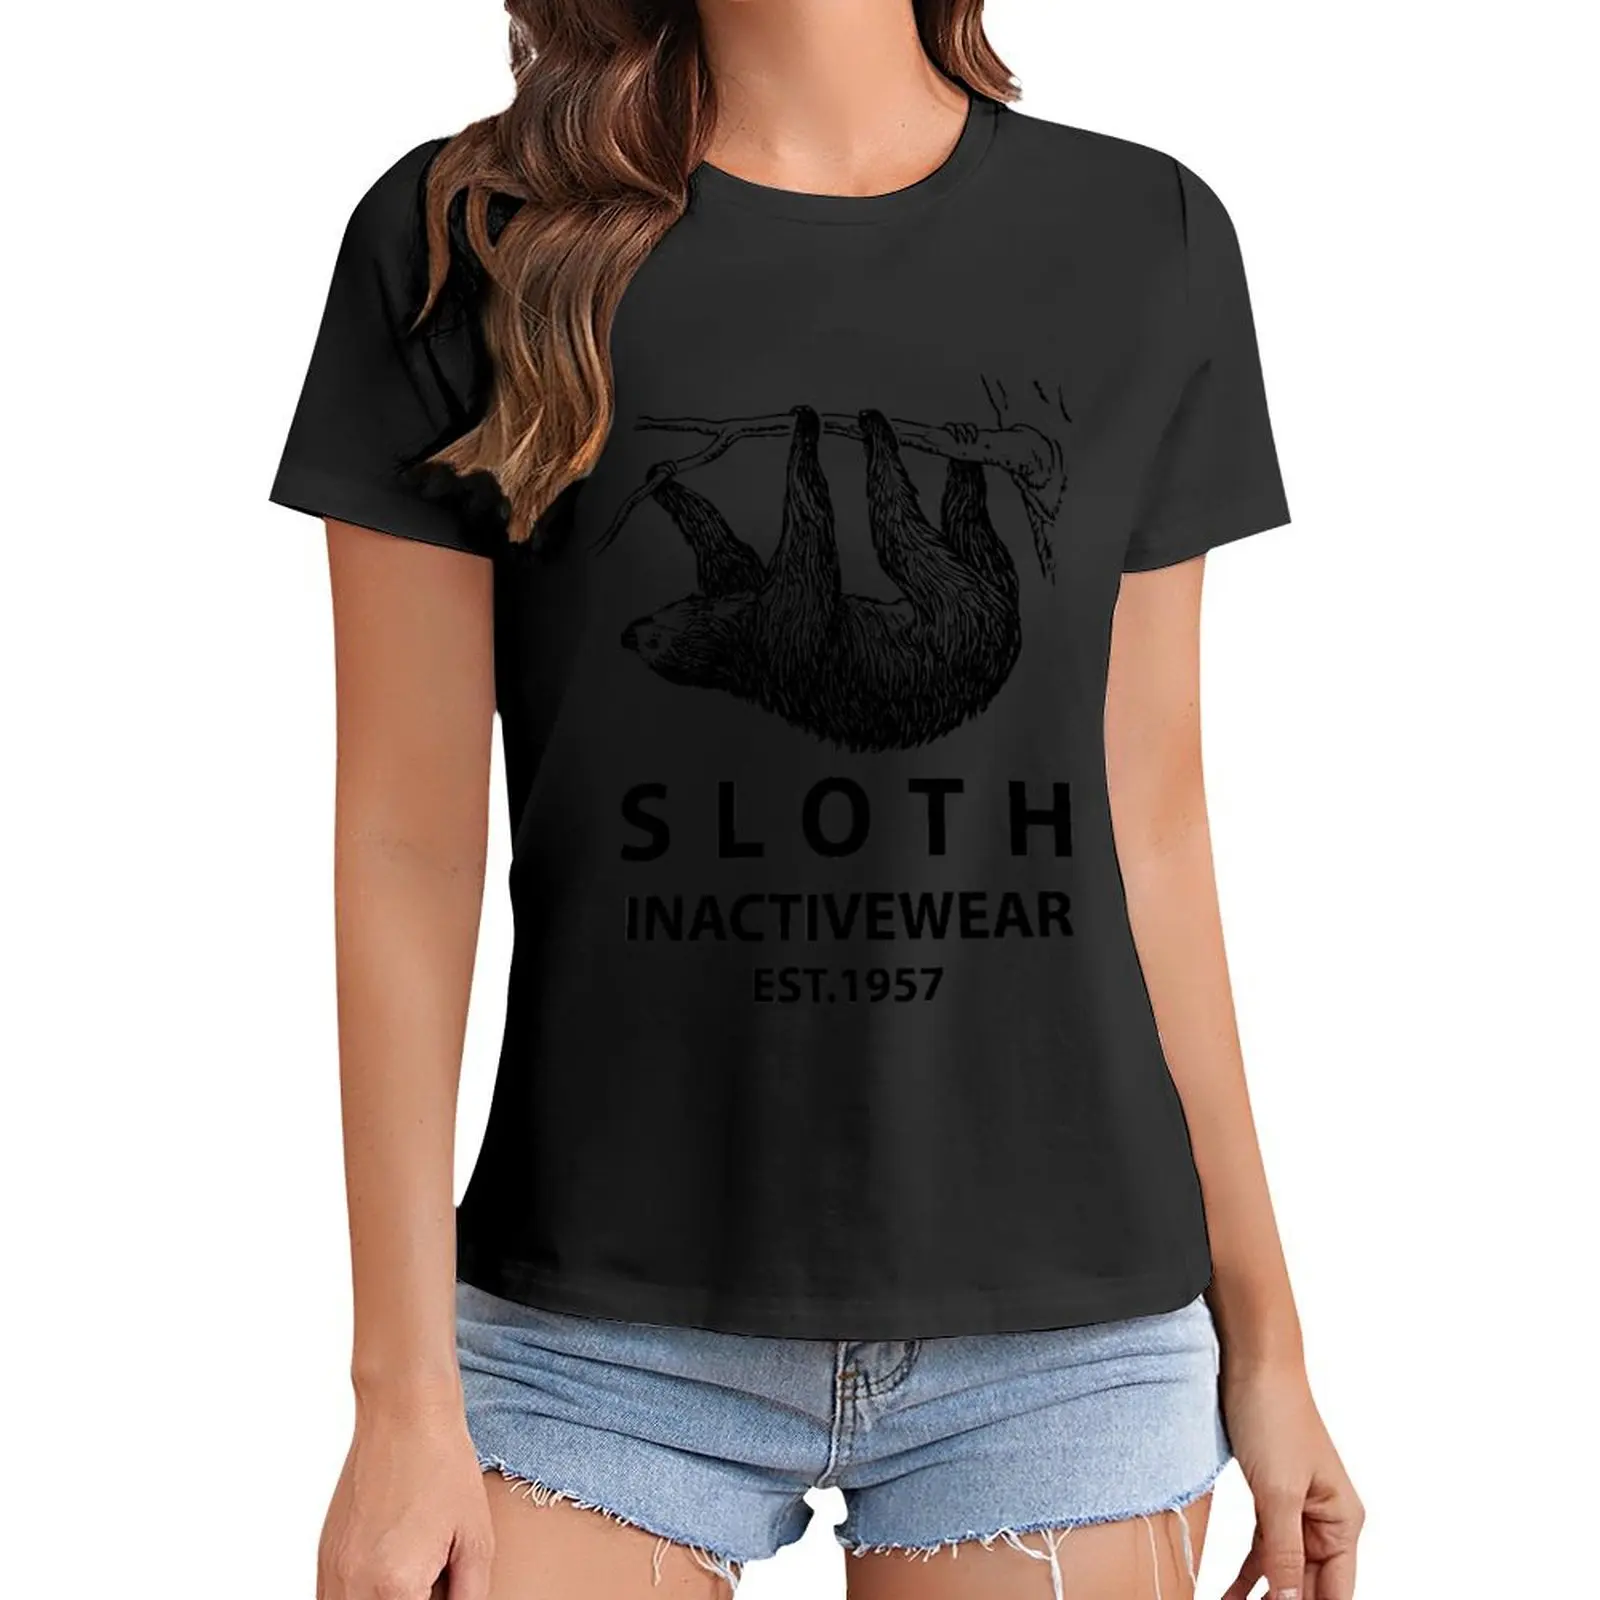 

Sloth Inactivewear T-Shirt funny quick-drying plus size tops funnys clothes for Women